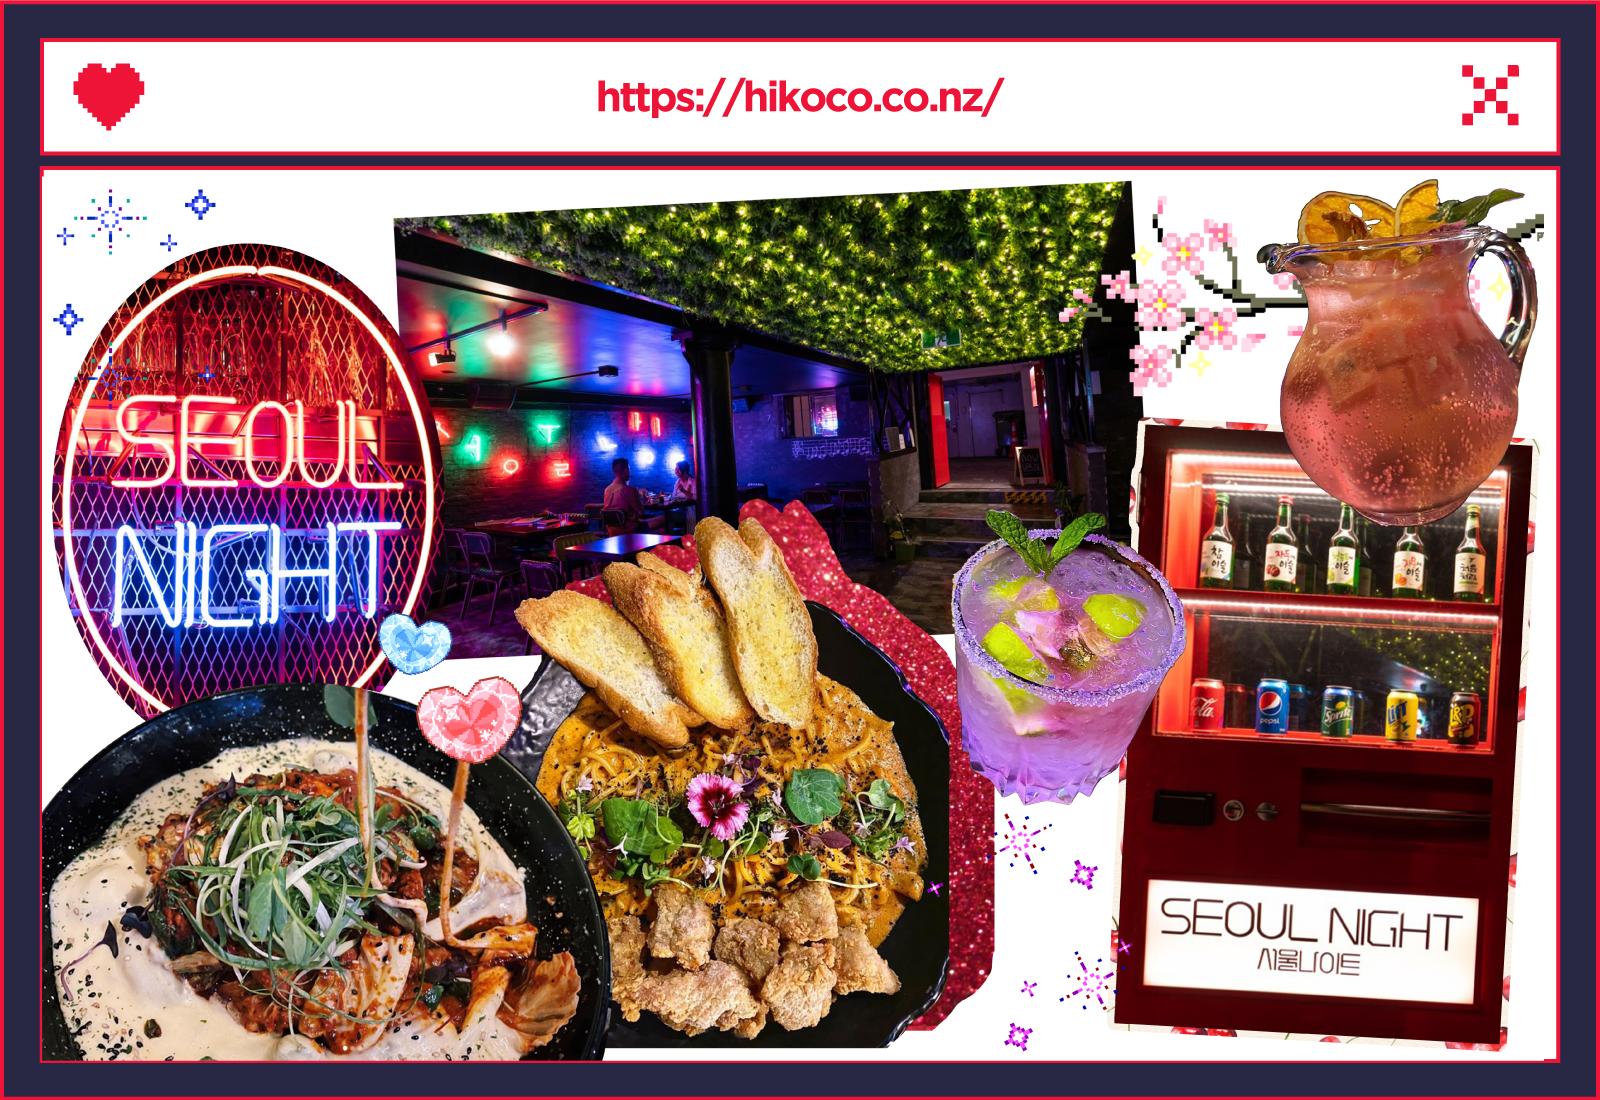 #aucklandeats: A Bar to Enjoy the Seoul Nightlife